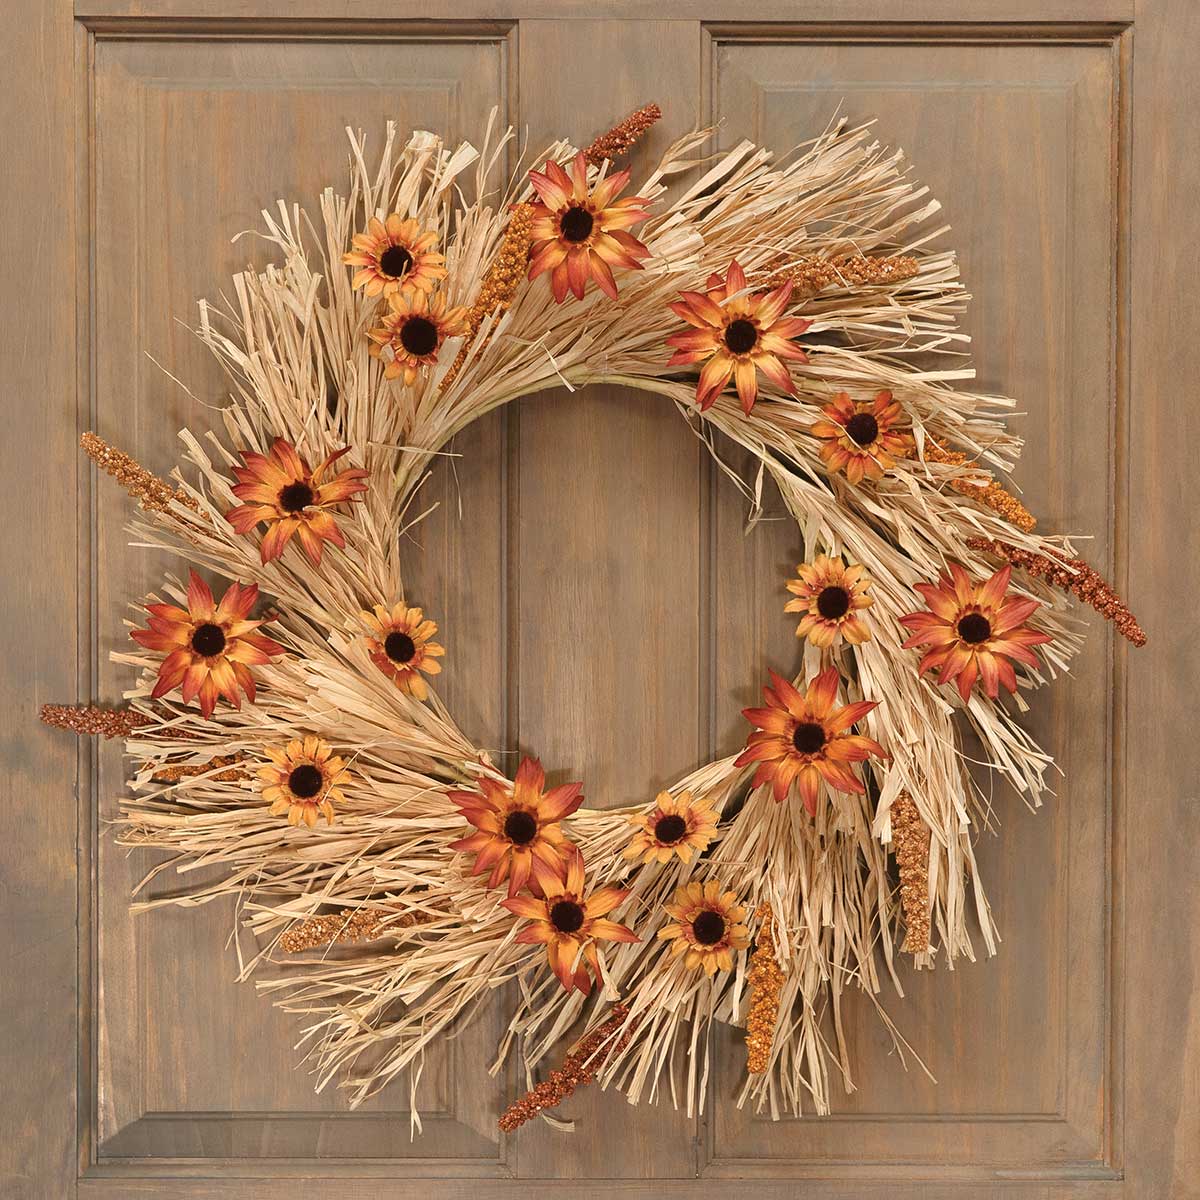 WREATH FESTIVE FIELD 22IN (INNER RING 9IN) MUSTARD/RUST/BEIGE - Click Image to Close